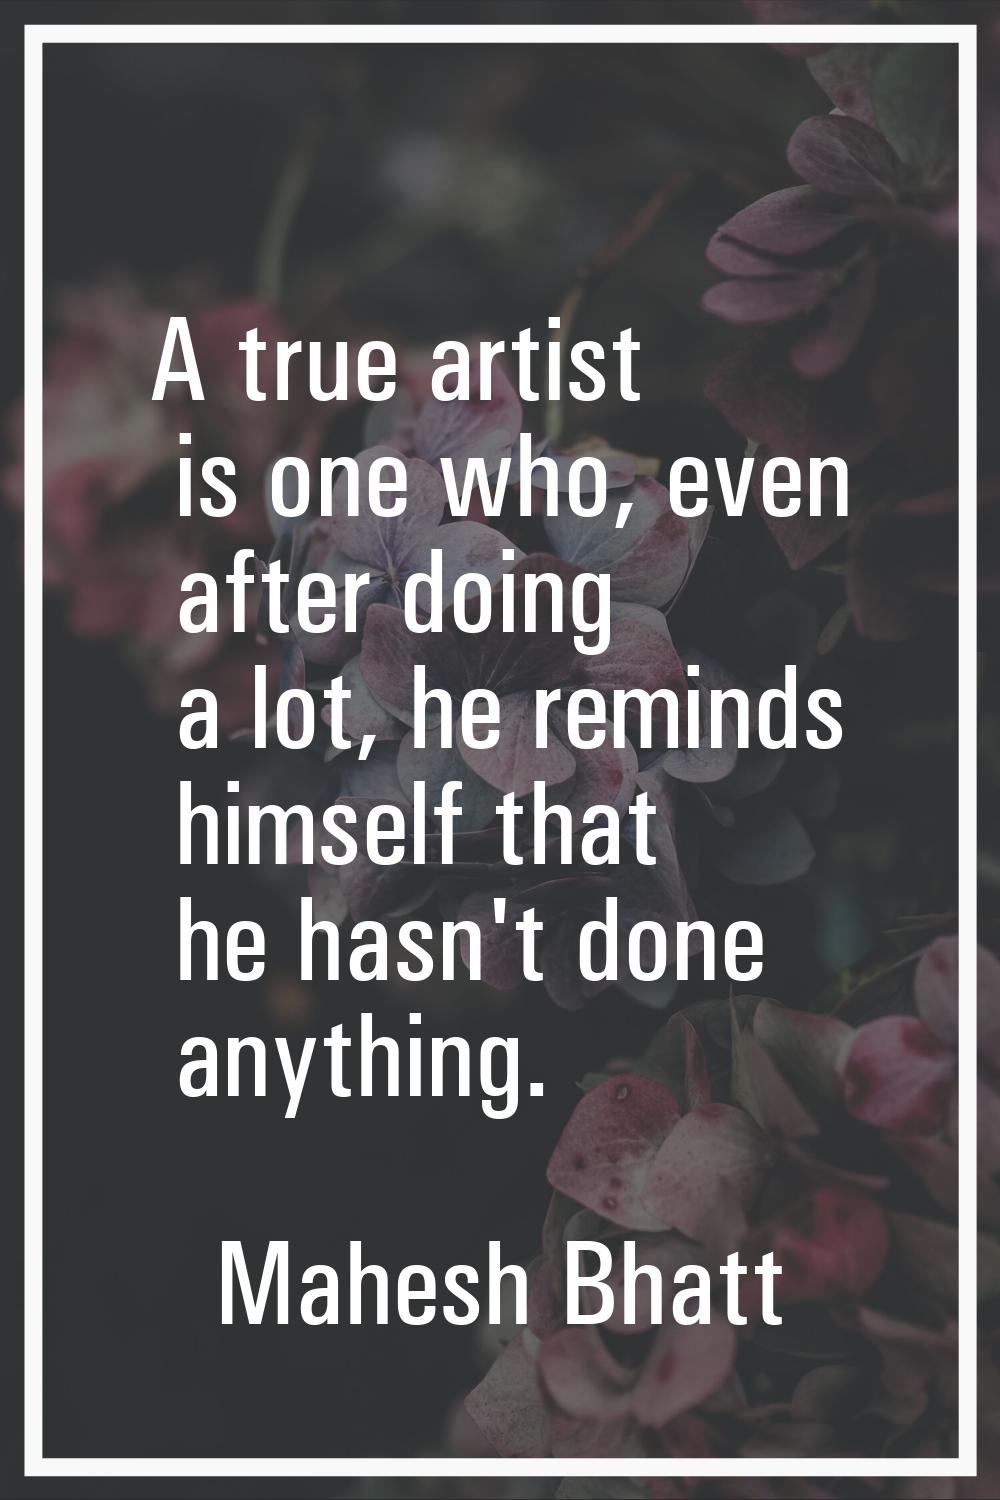 A true artist is one who, even after doing a lot, he reminds himself that he hasn't done anything.